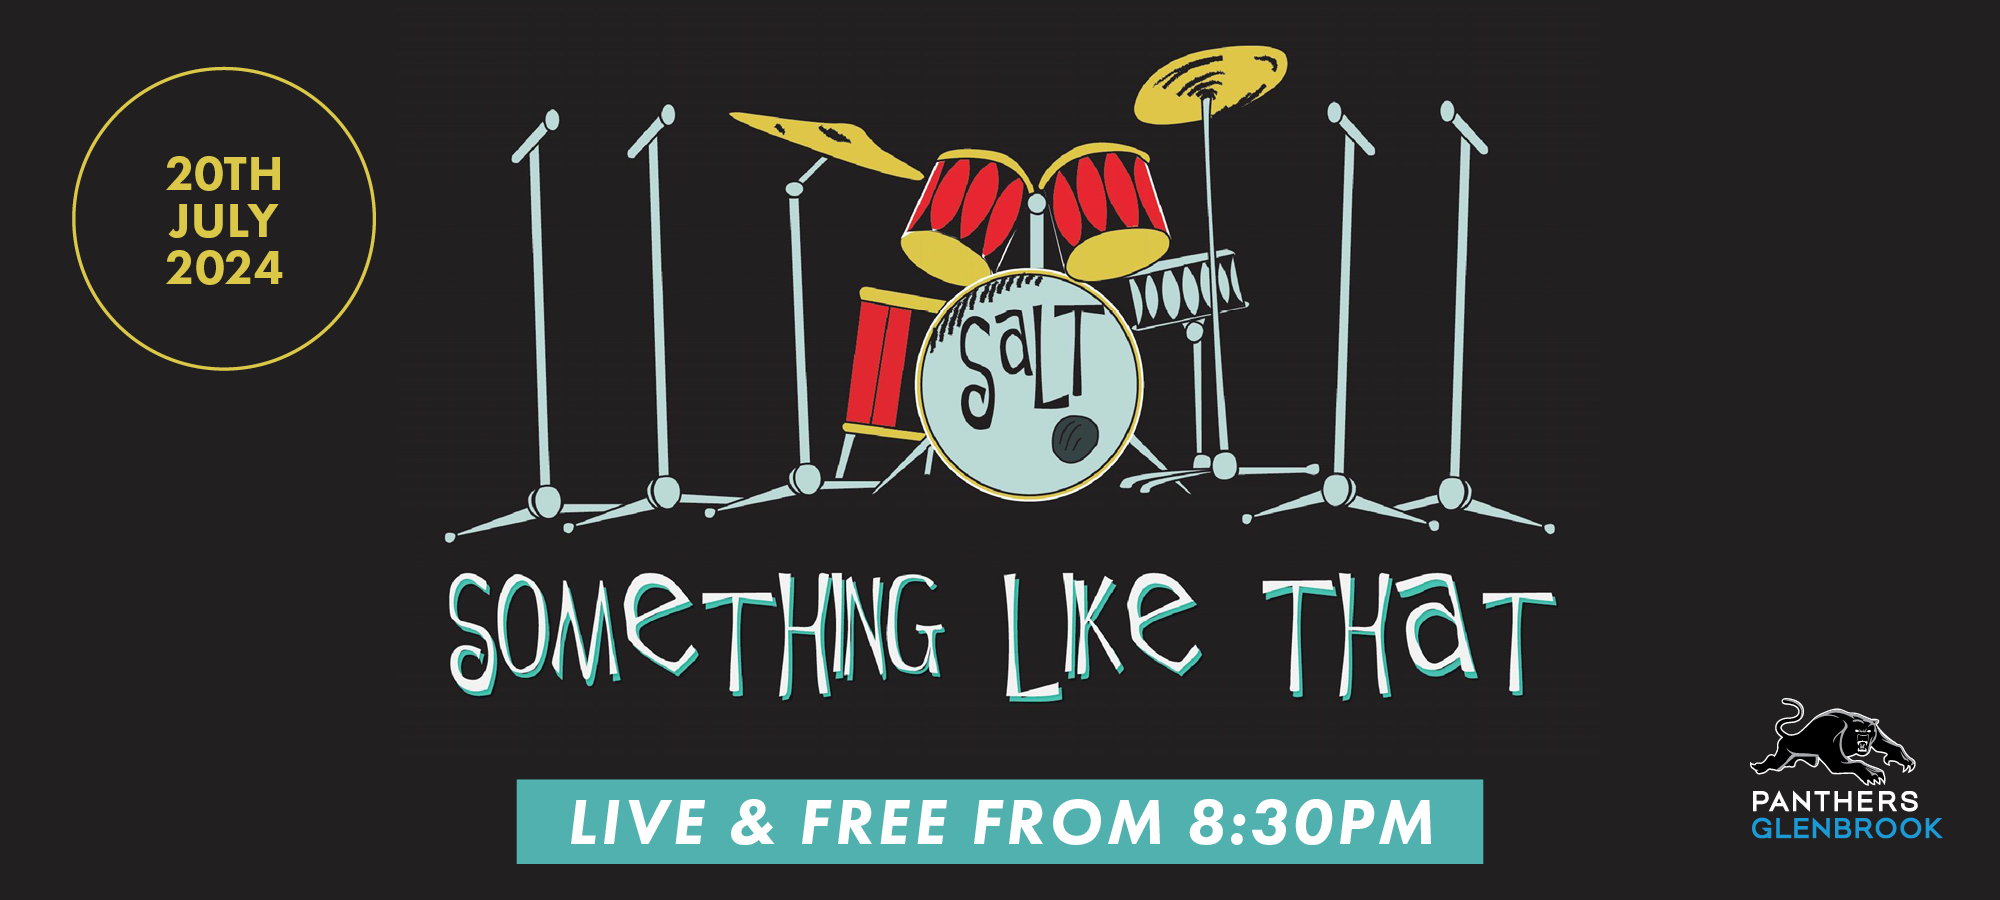 Something Like That (SaLT) – Saturday Live Entertainment in July